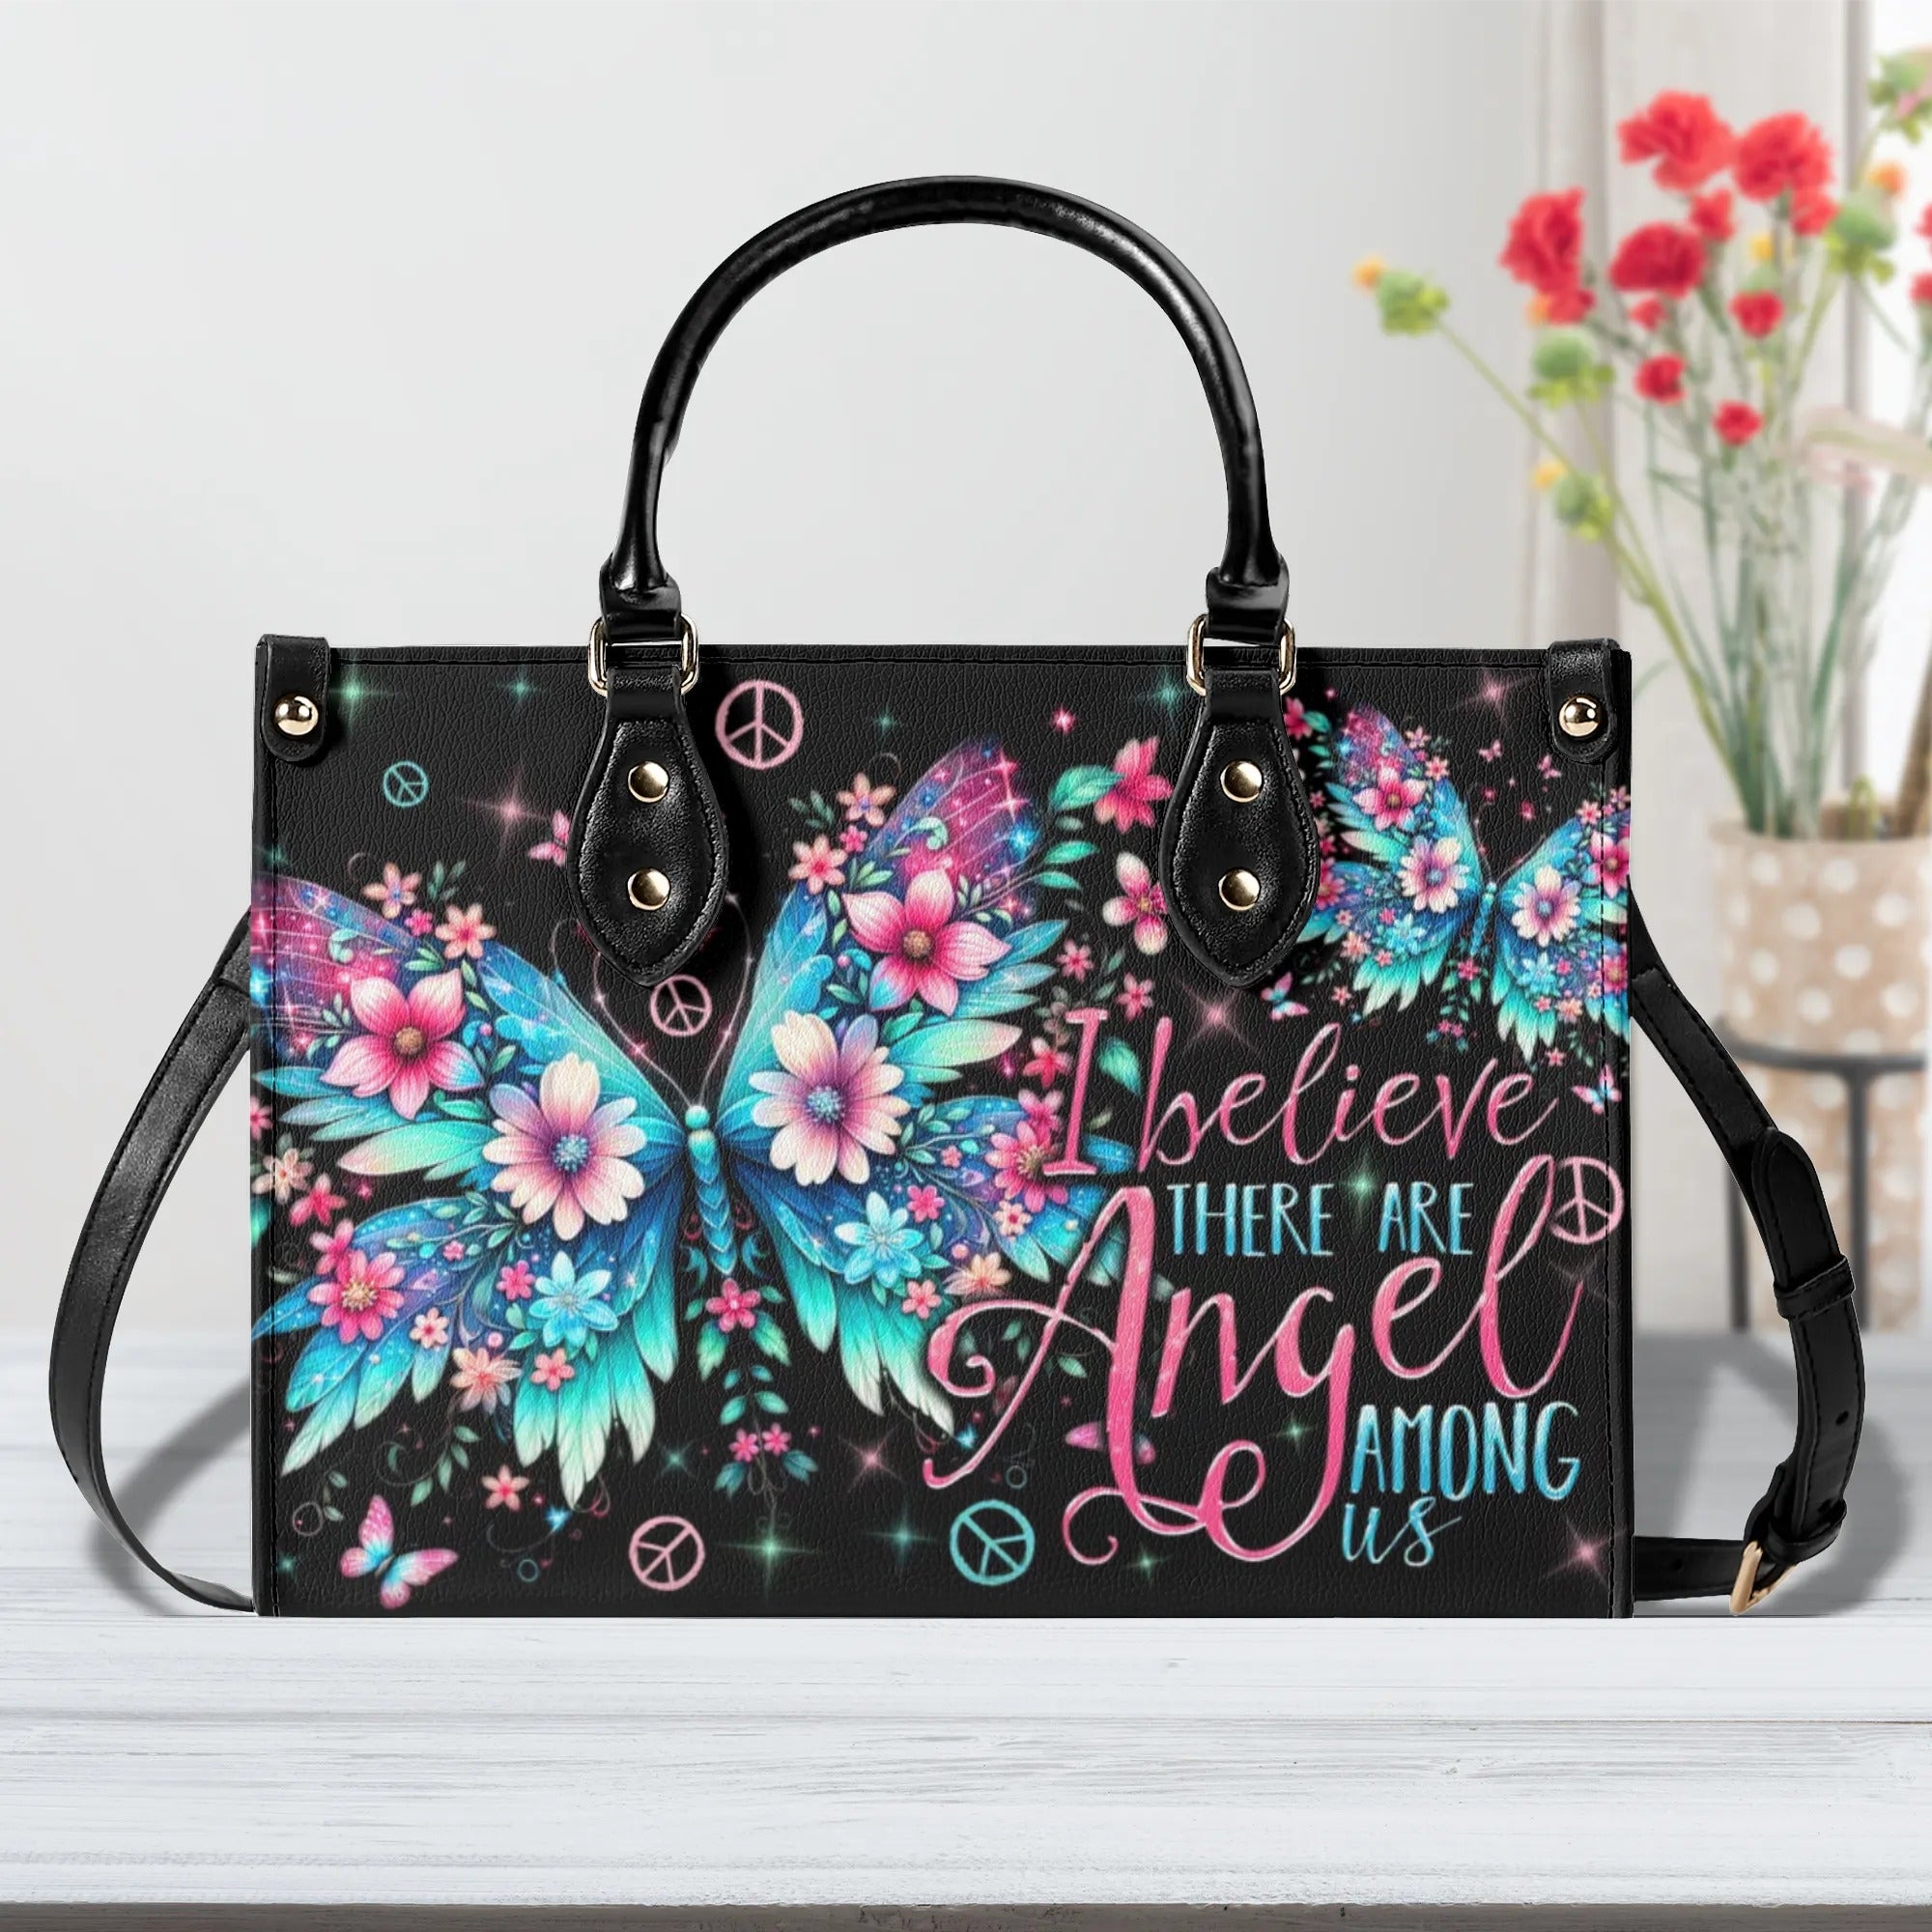 I BELIEVE THERE ARE ANGELS AMONG US LEATHER HANDBAG - TYTD1306242